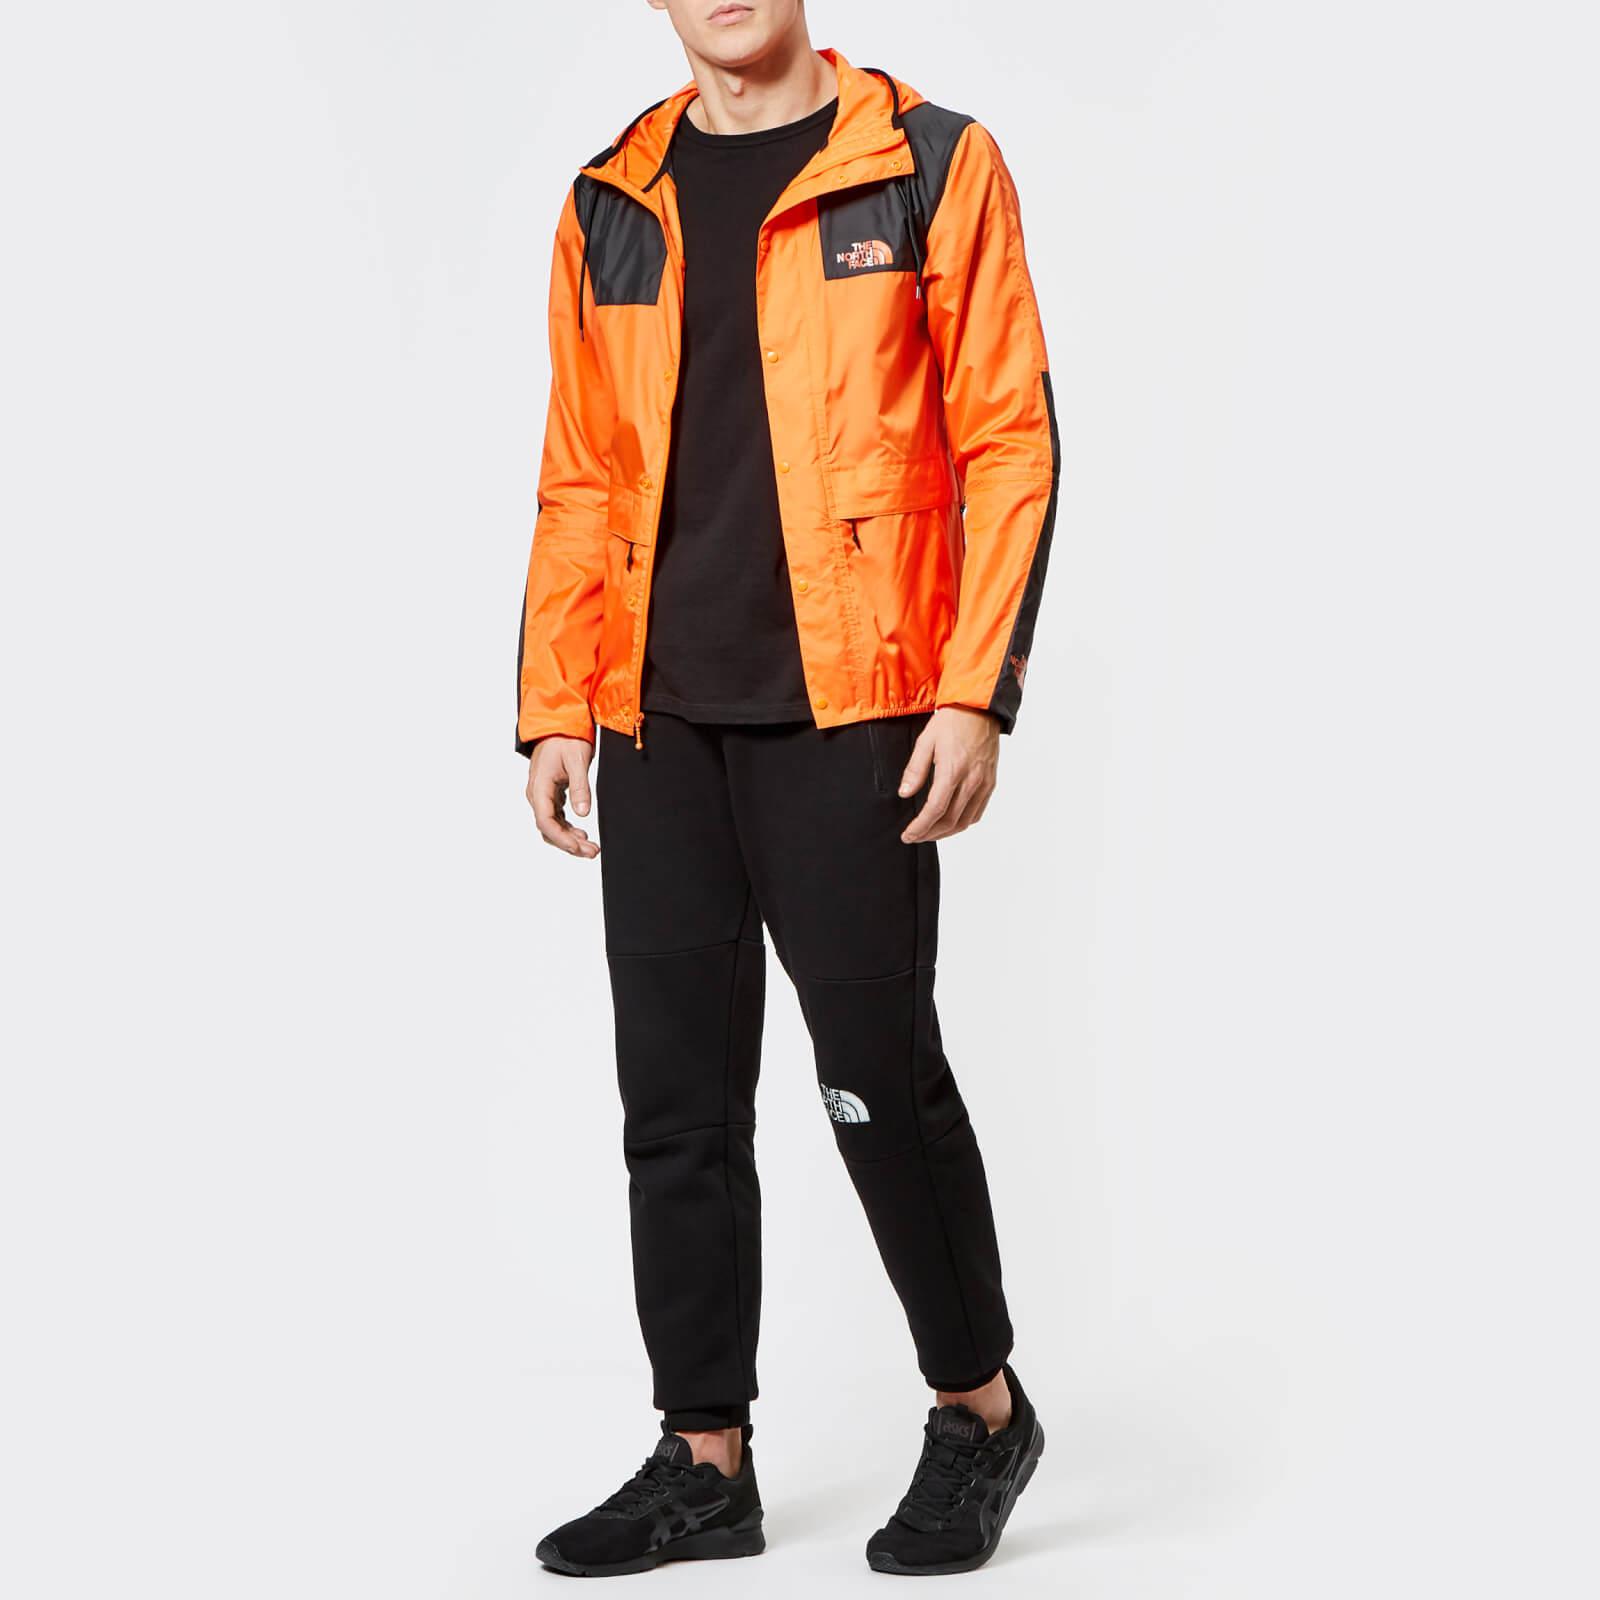 The North Face Synthetic Mountain 1985 Seasonal Celebration Jacket in  Orange for Men - Lyst